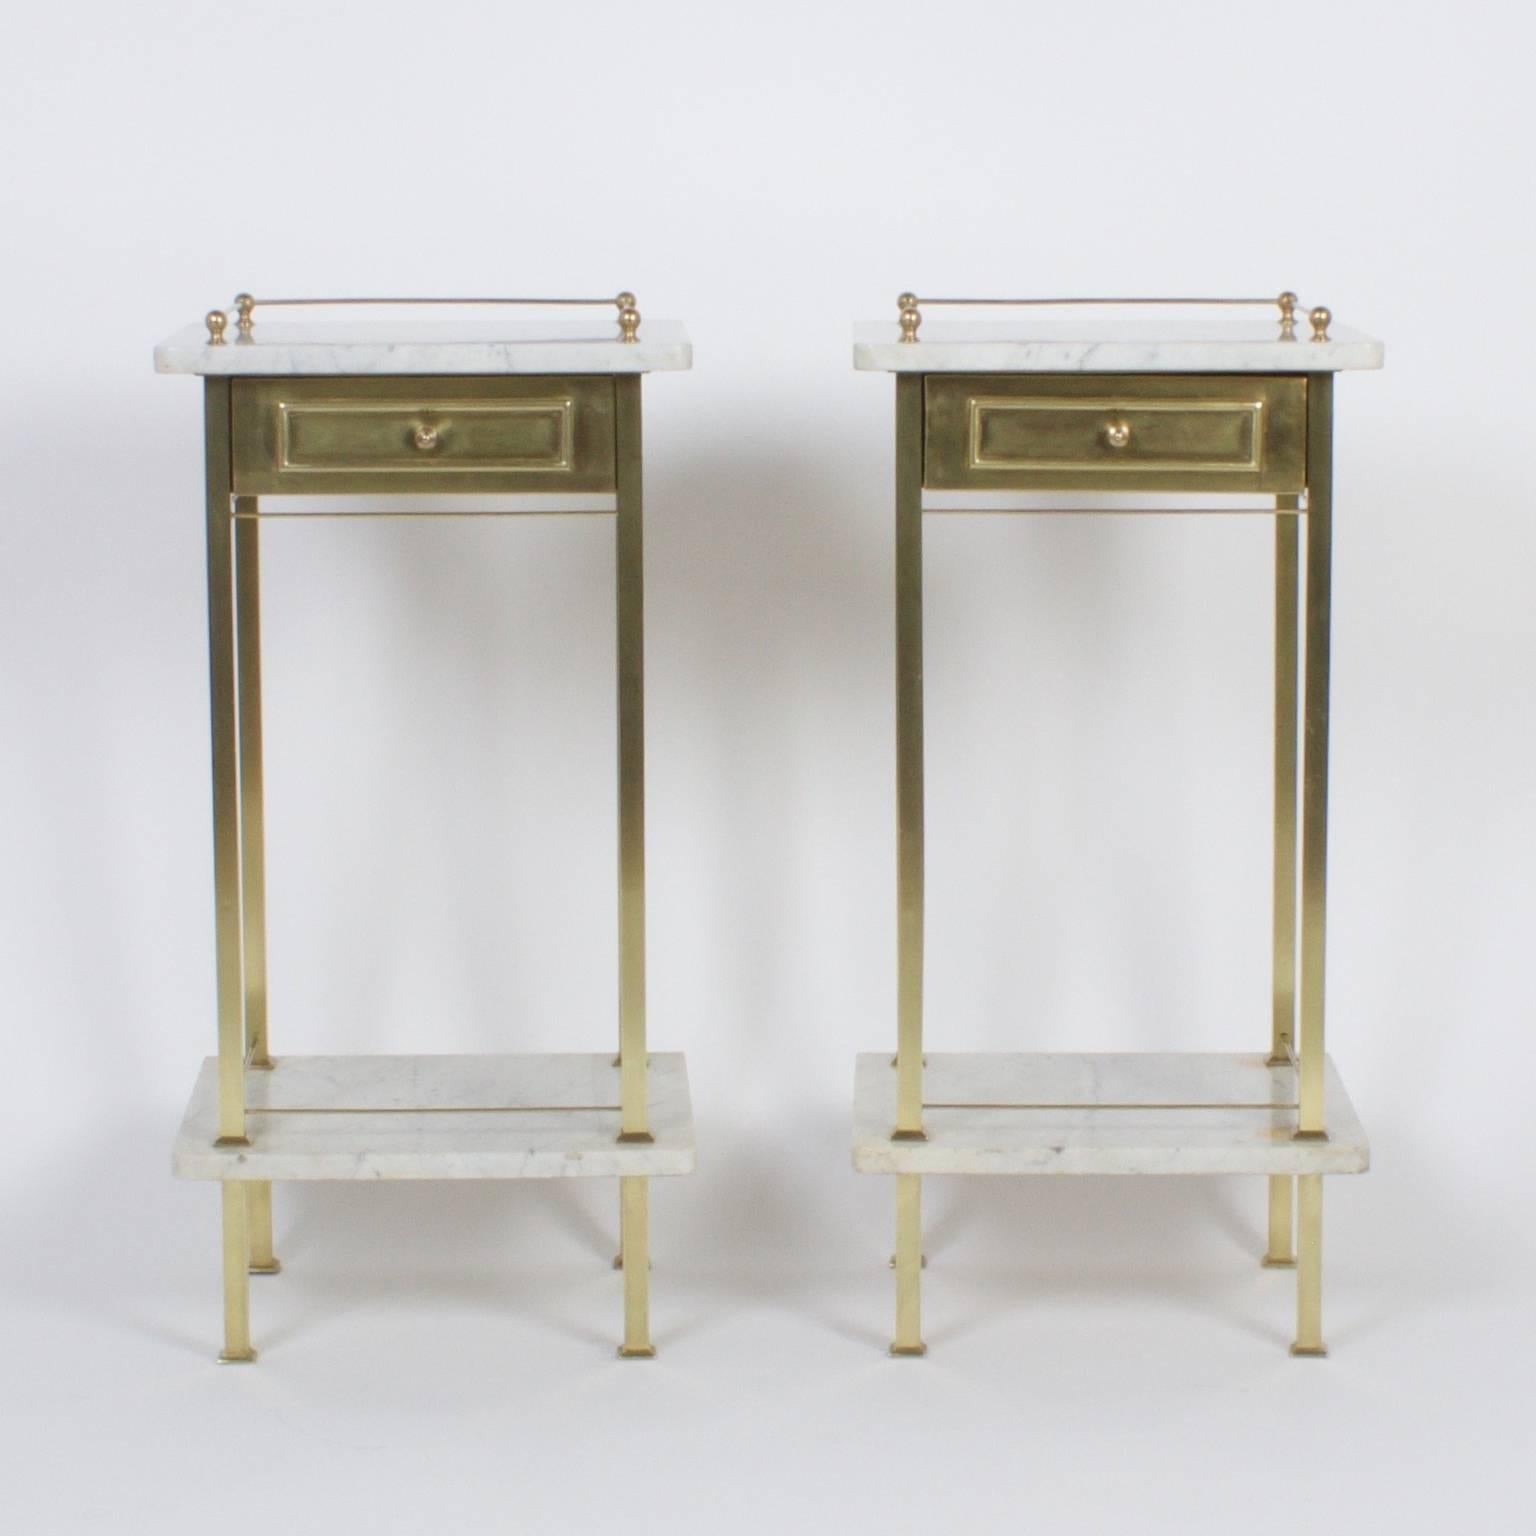 Here is a dapper pair of antique, English nightstands with sturdy brass frames and two white marble tiers both with brass galleries. Featuring a no nonsense form that crosses the style lines between Arts and Crafts, Industrial and modern.